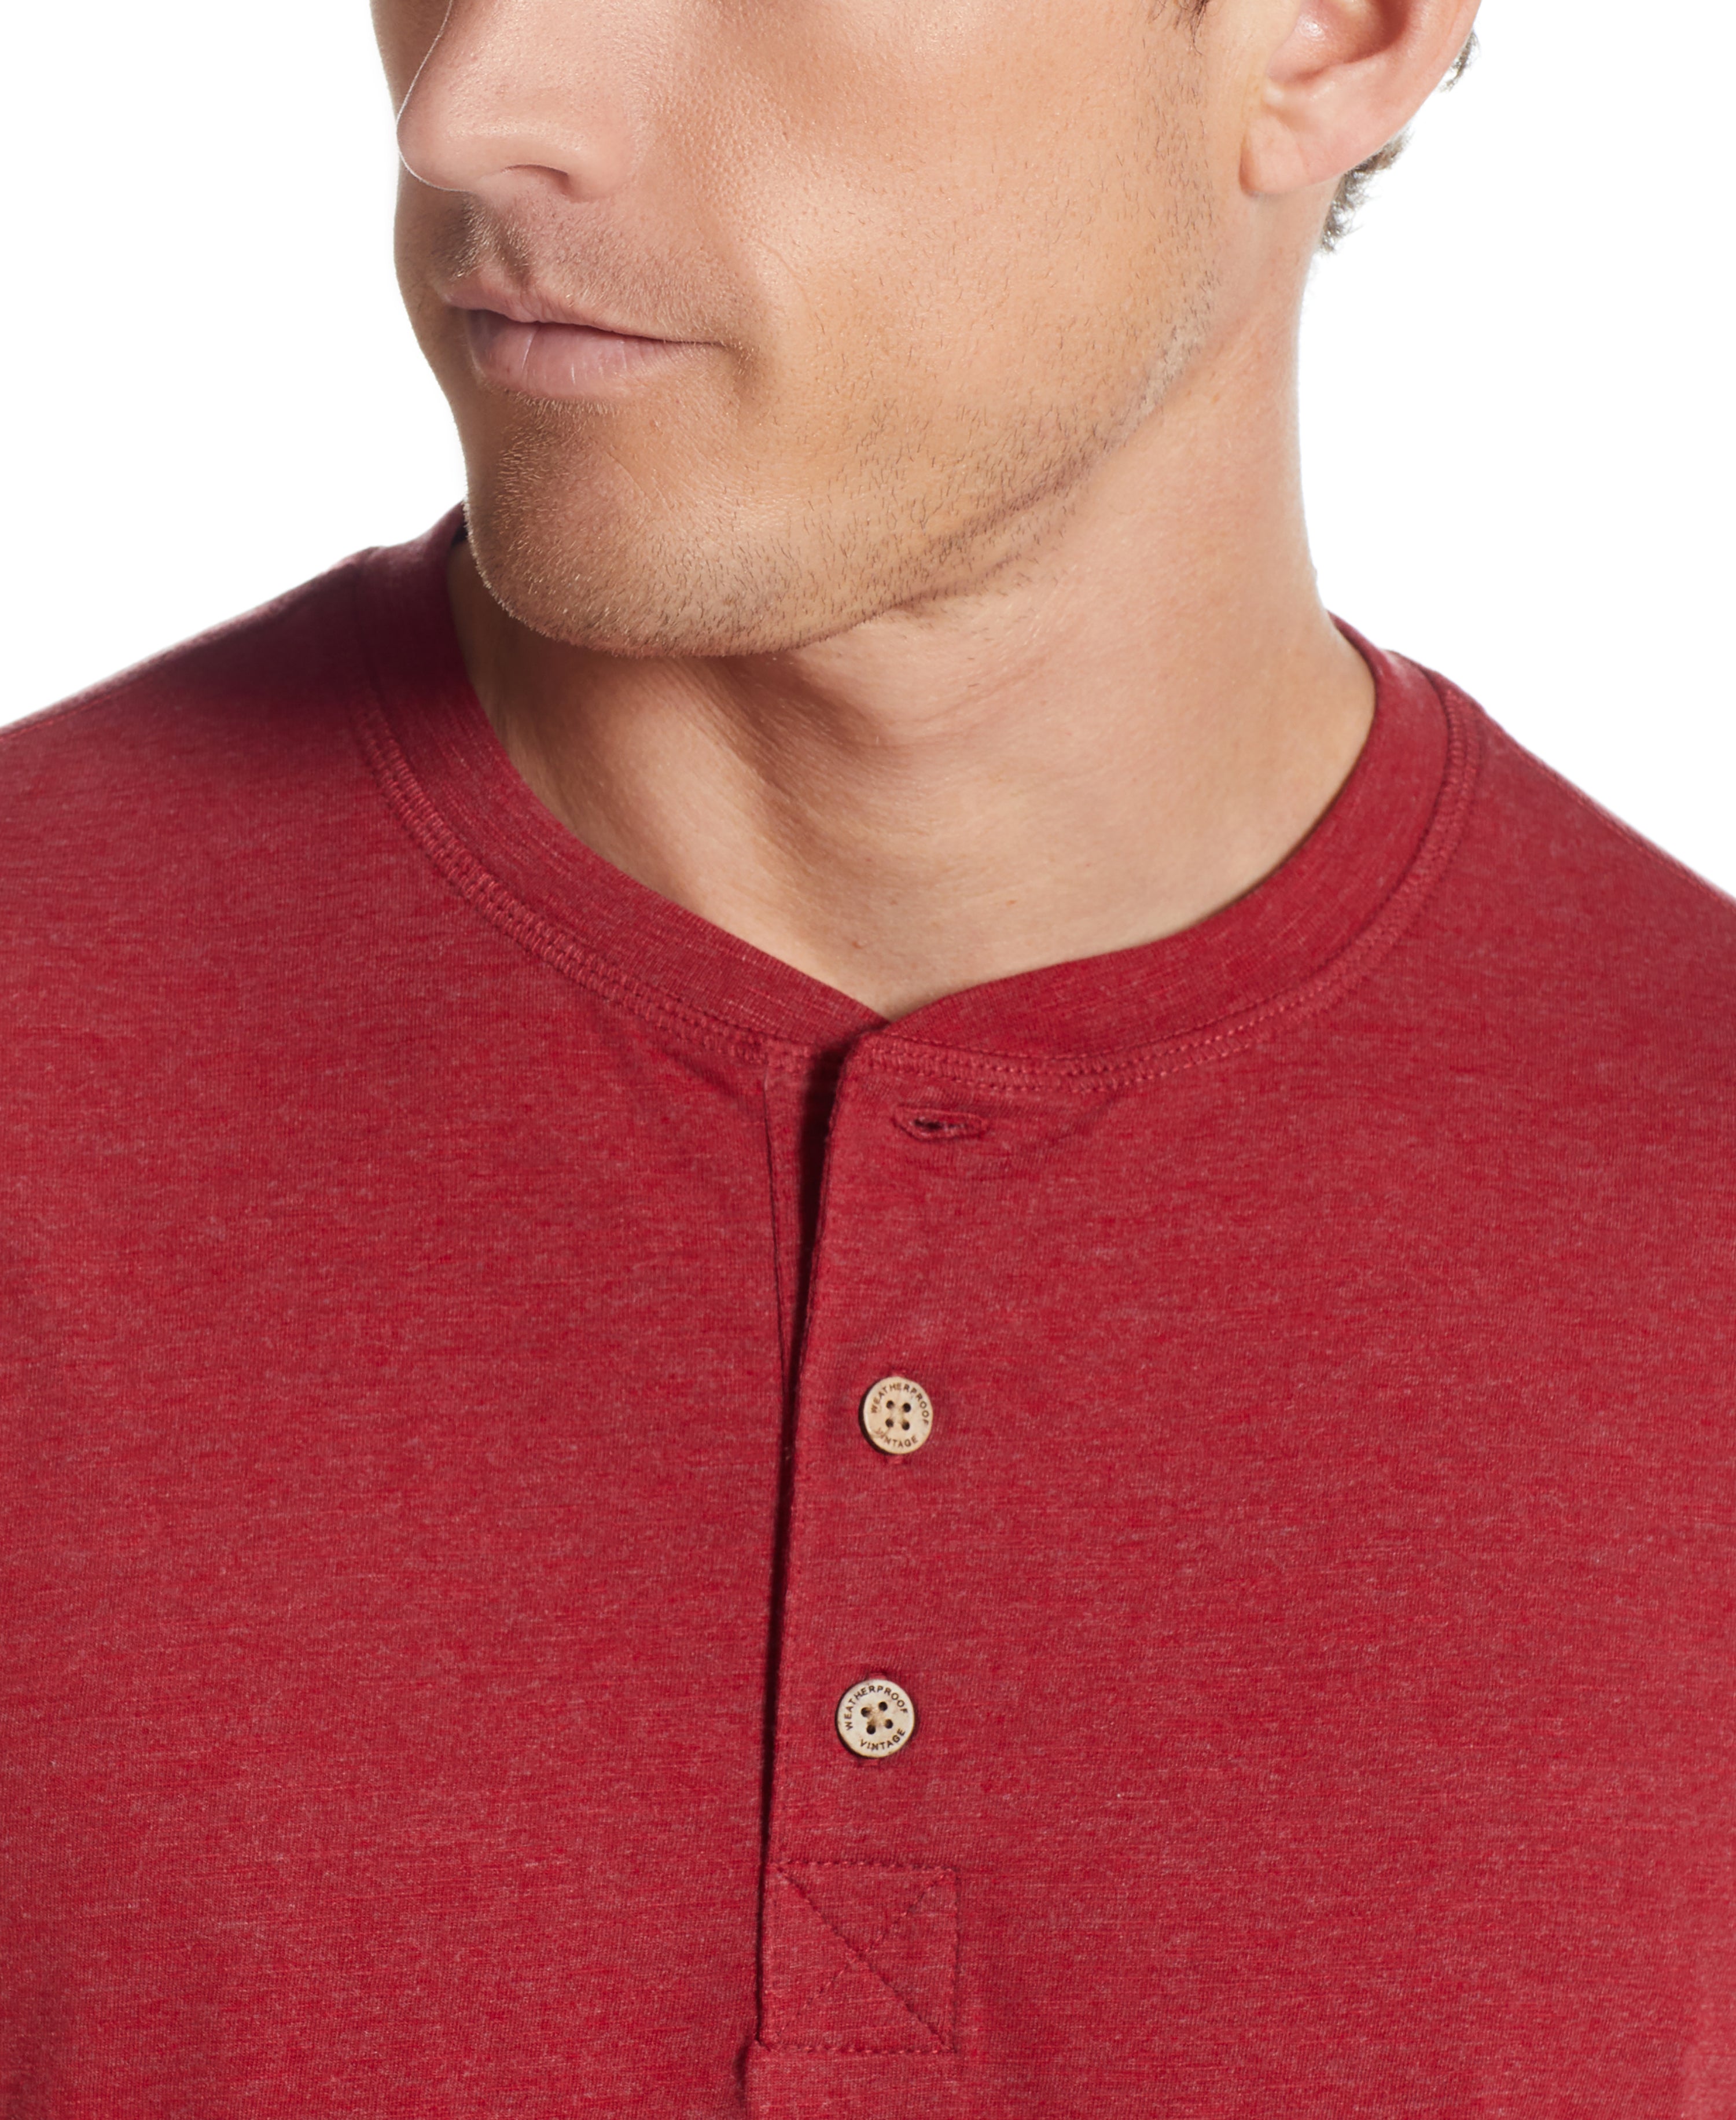 SHORT SLEEVE HENLEY IN RIO RED